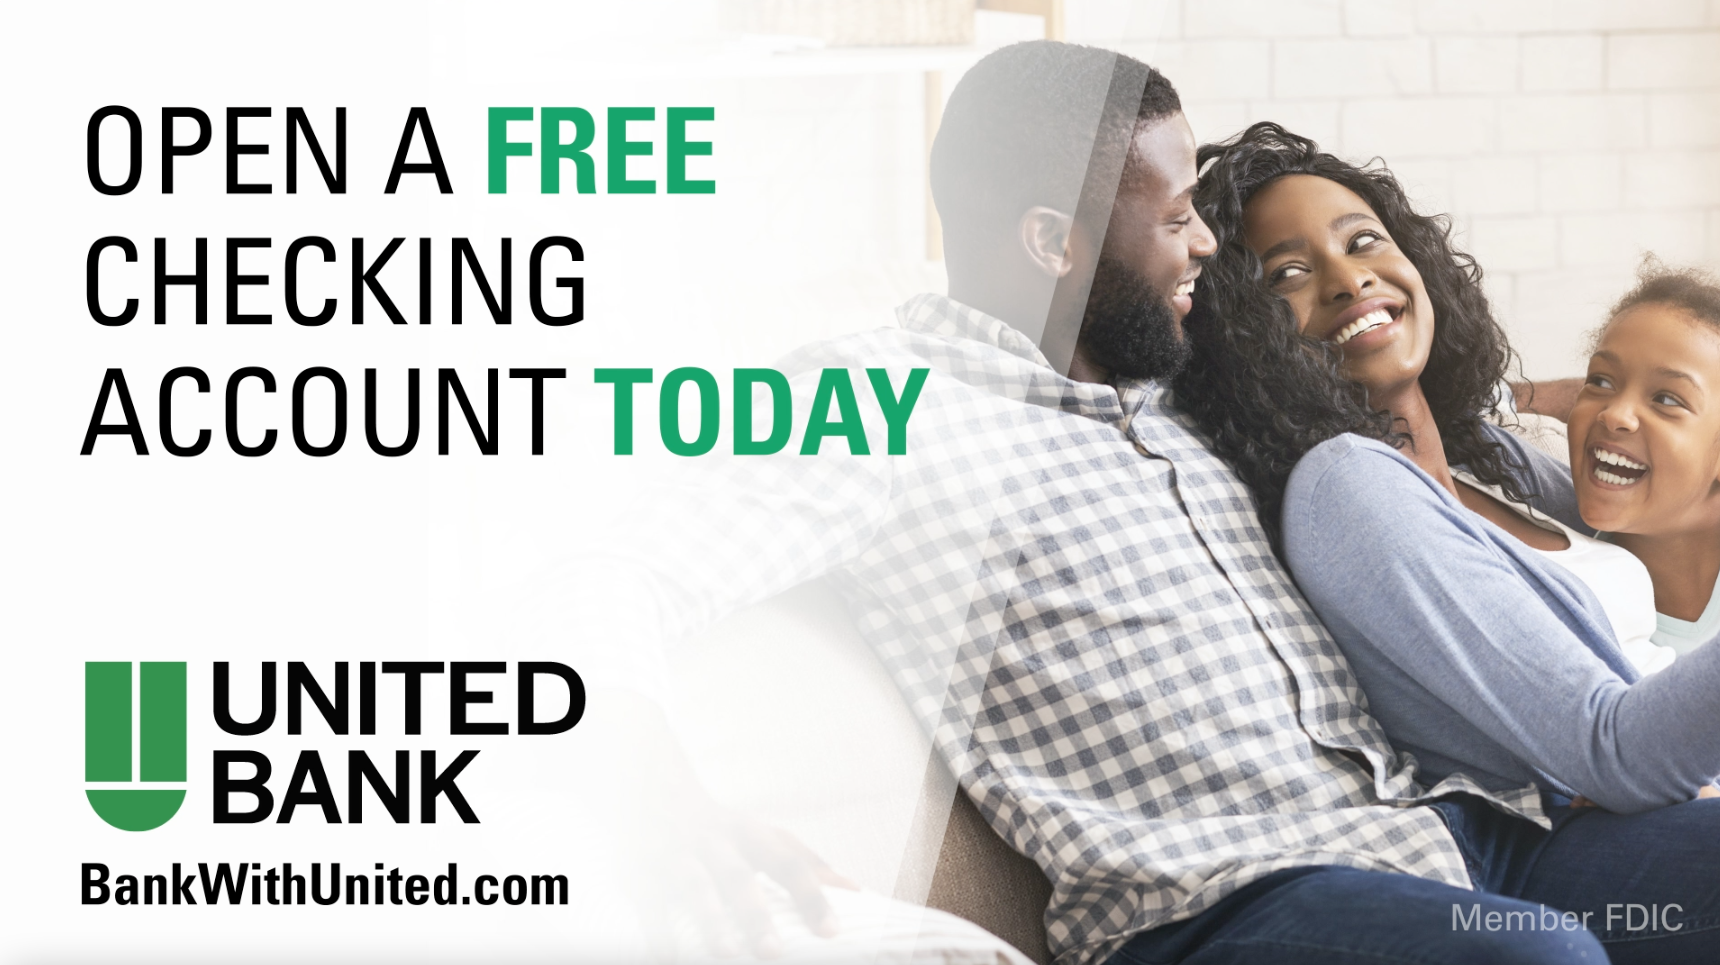 Growing Smarter - Data-Driven Performance Marketing Helps Put United Bank on the Map